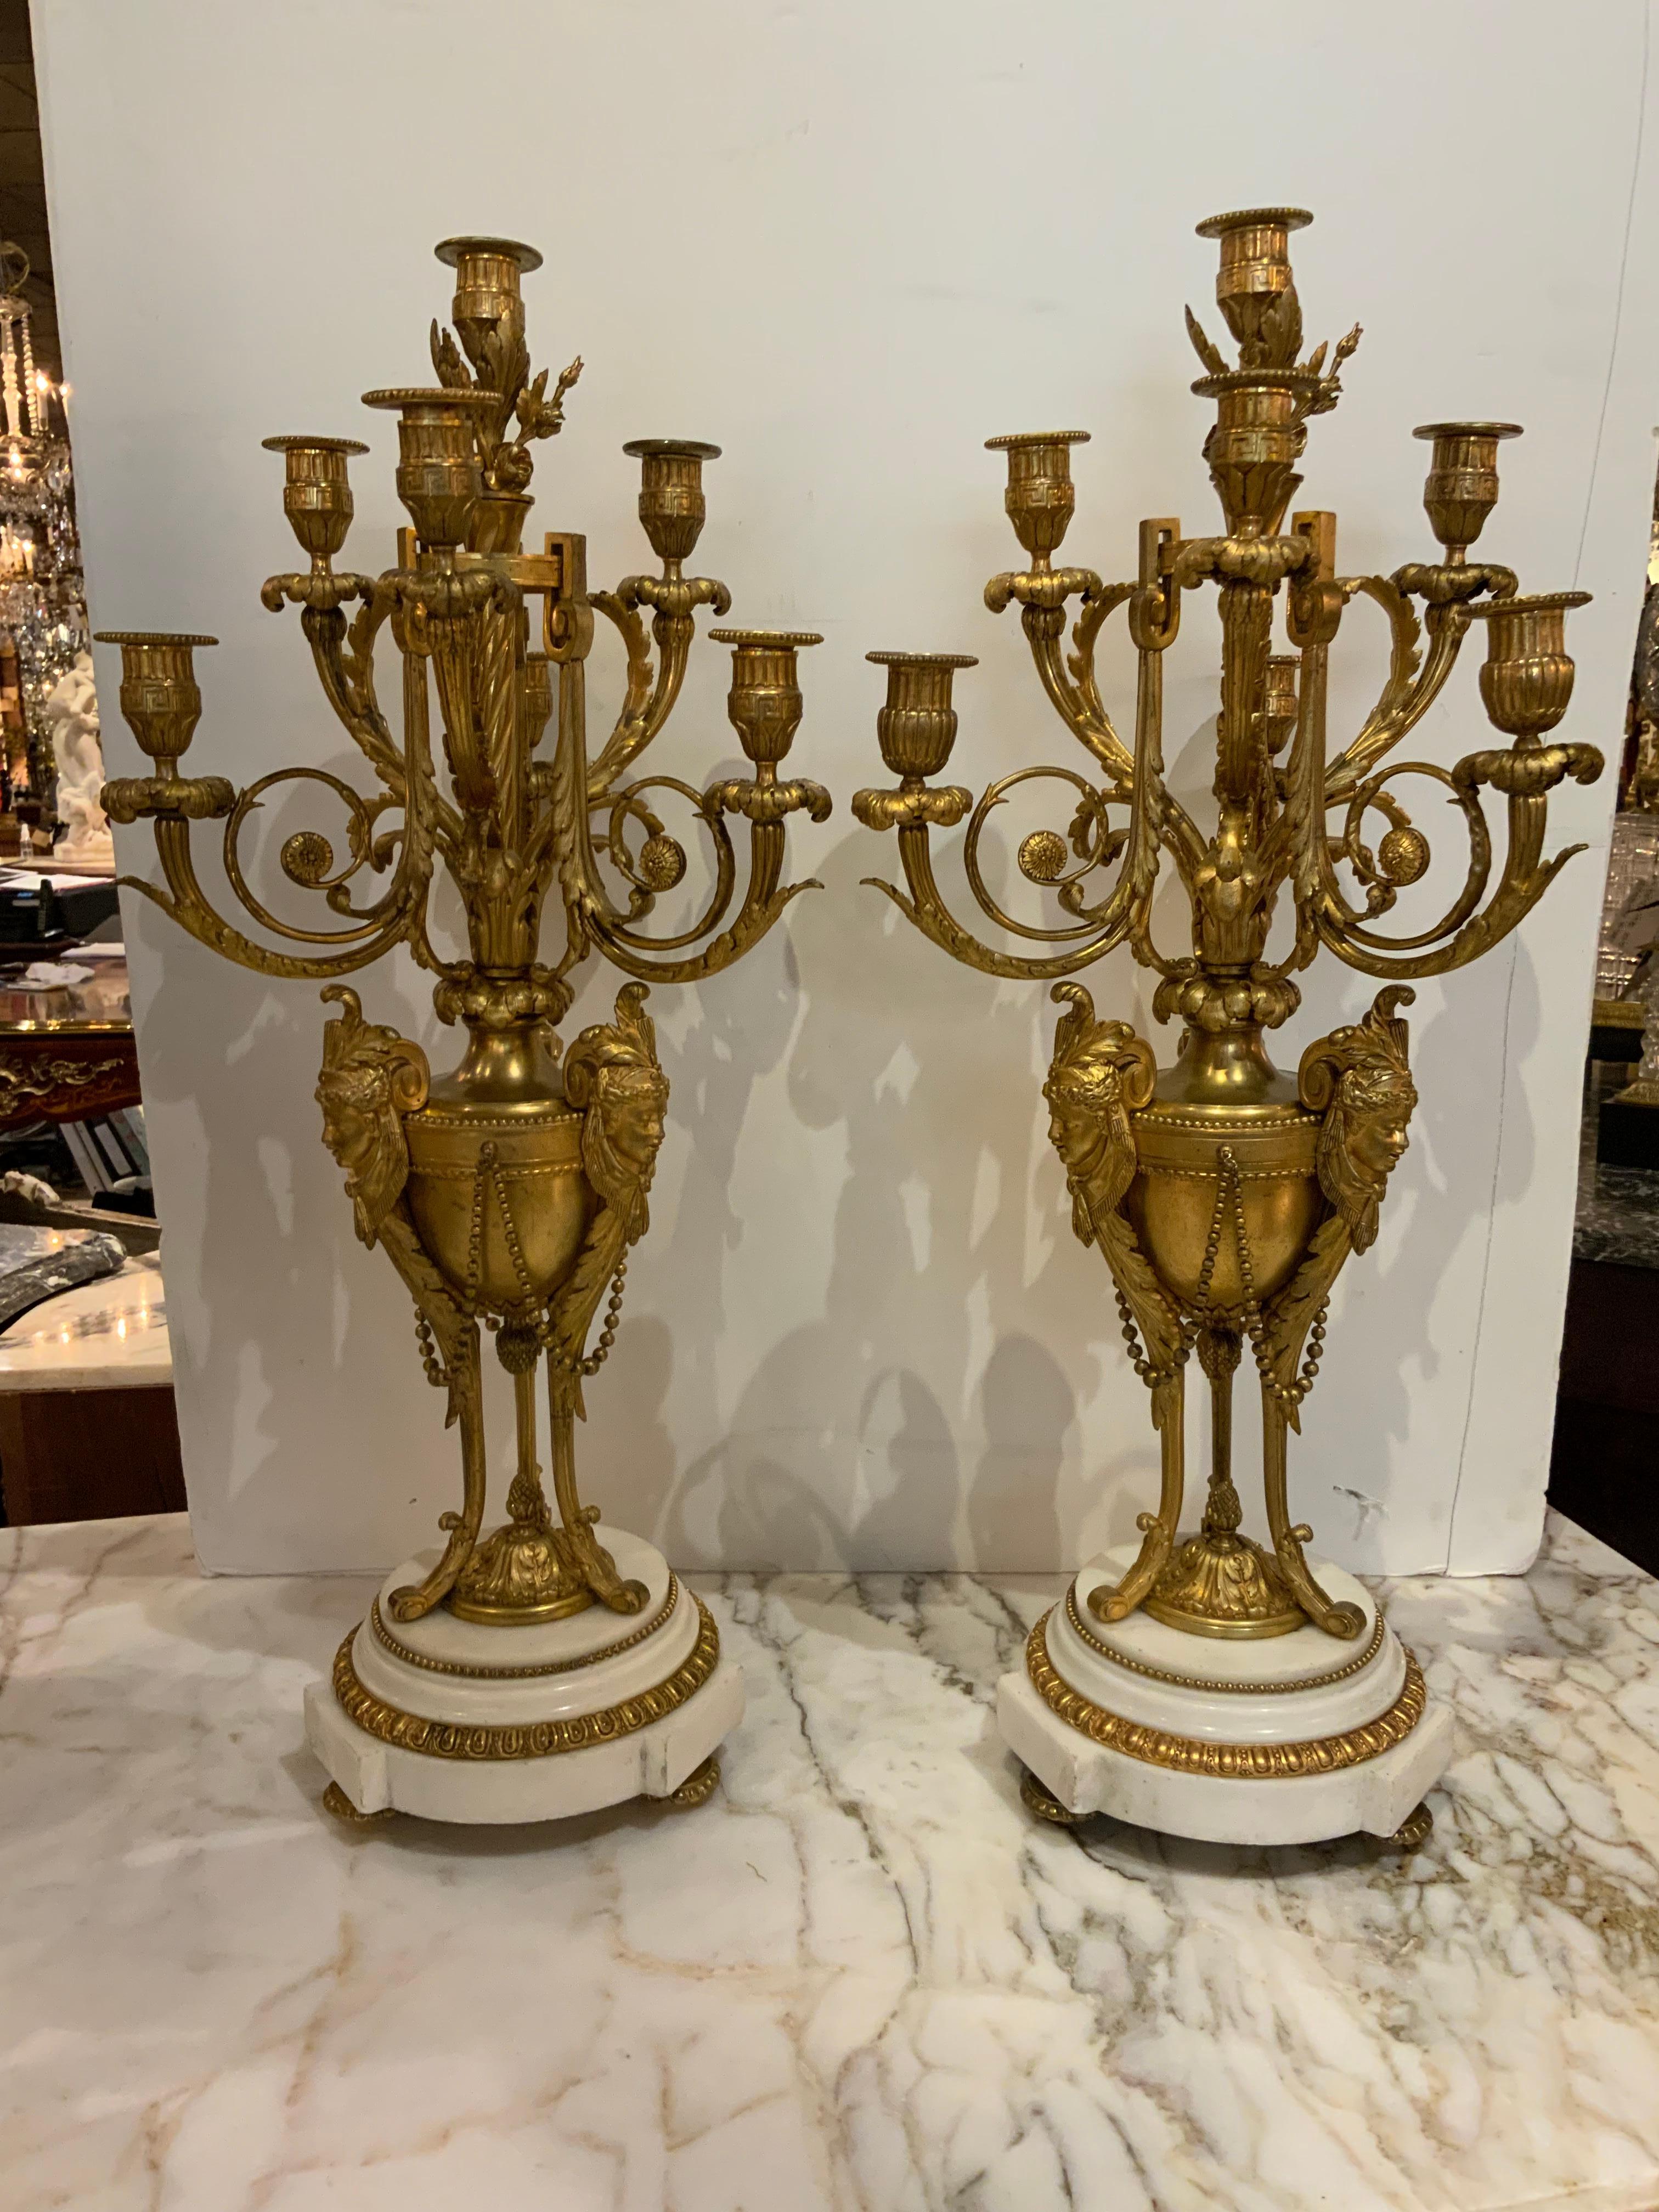 Exceptional pair of French candleabrum in bronze dore
Set on Carrara marble bases. These candleabrum are
Complete without any missing parts. They each have
Seven candle holders complete with bobesches.
The patina of the bronze is a soft gilt hue